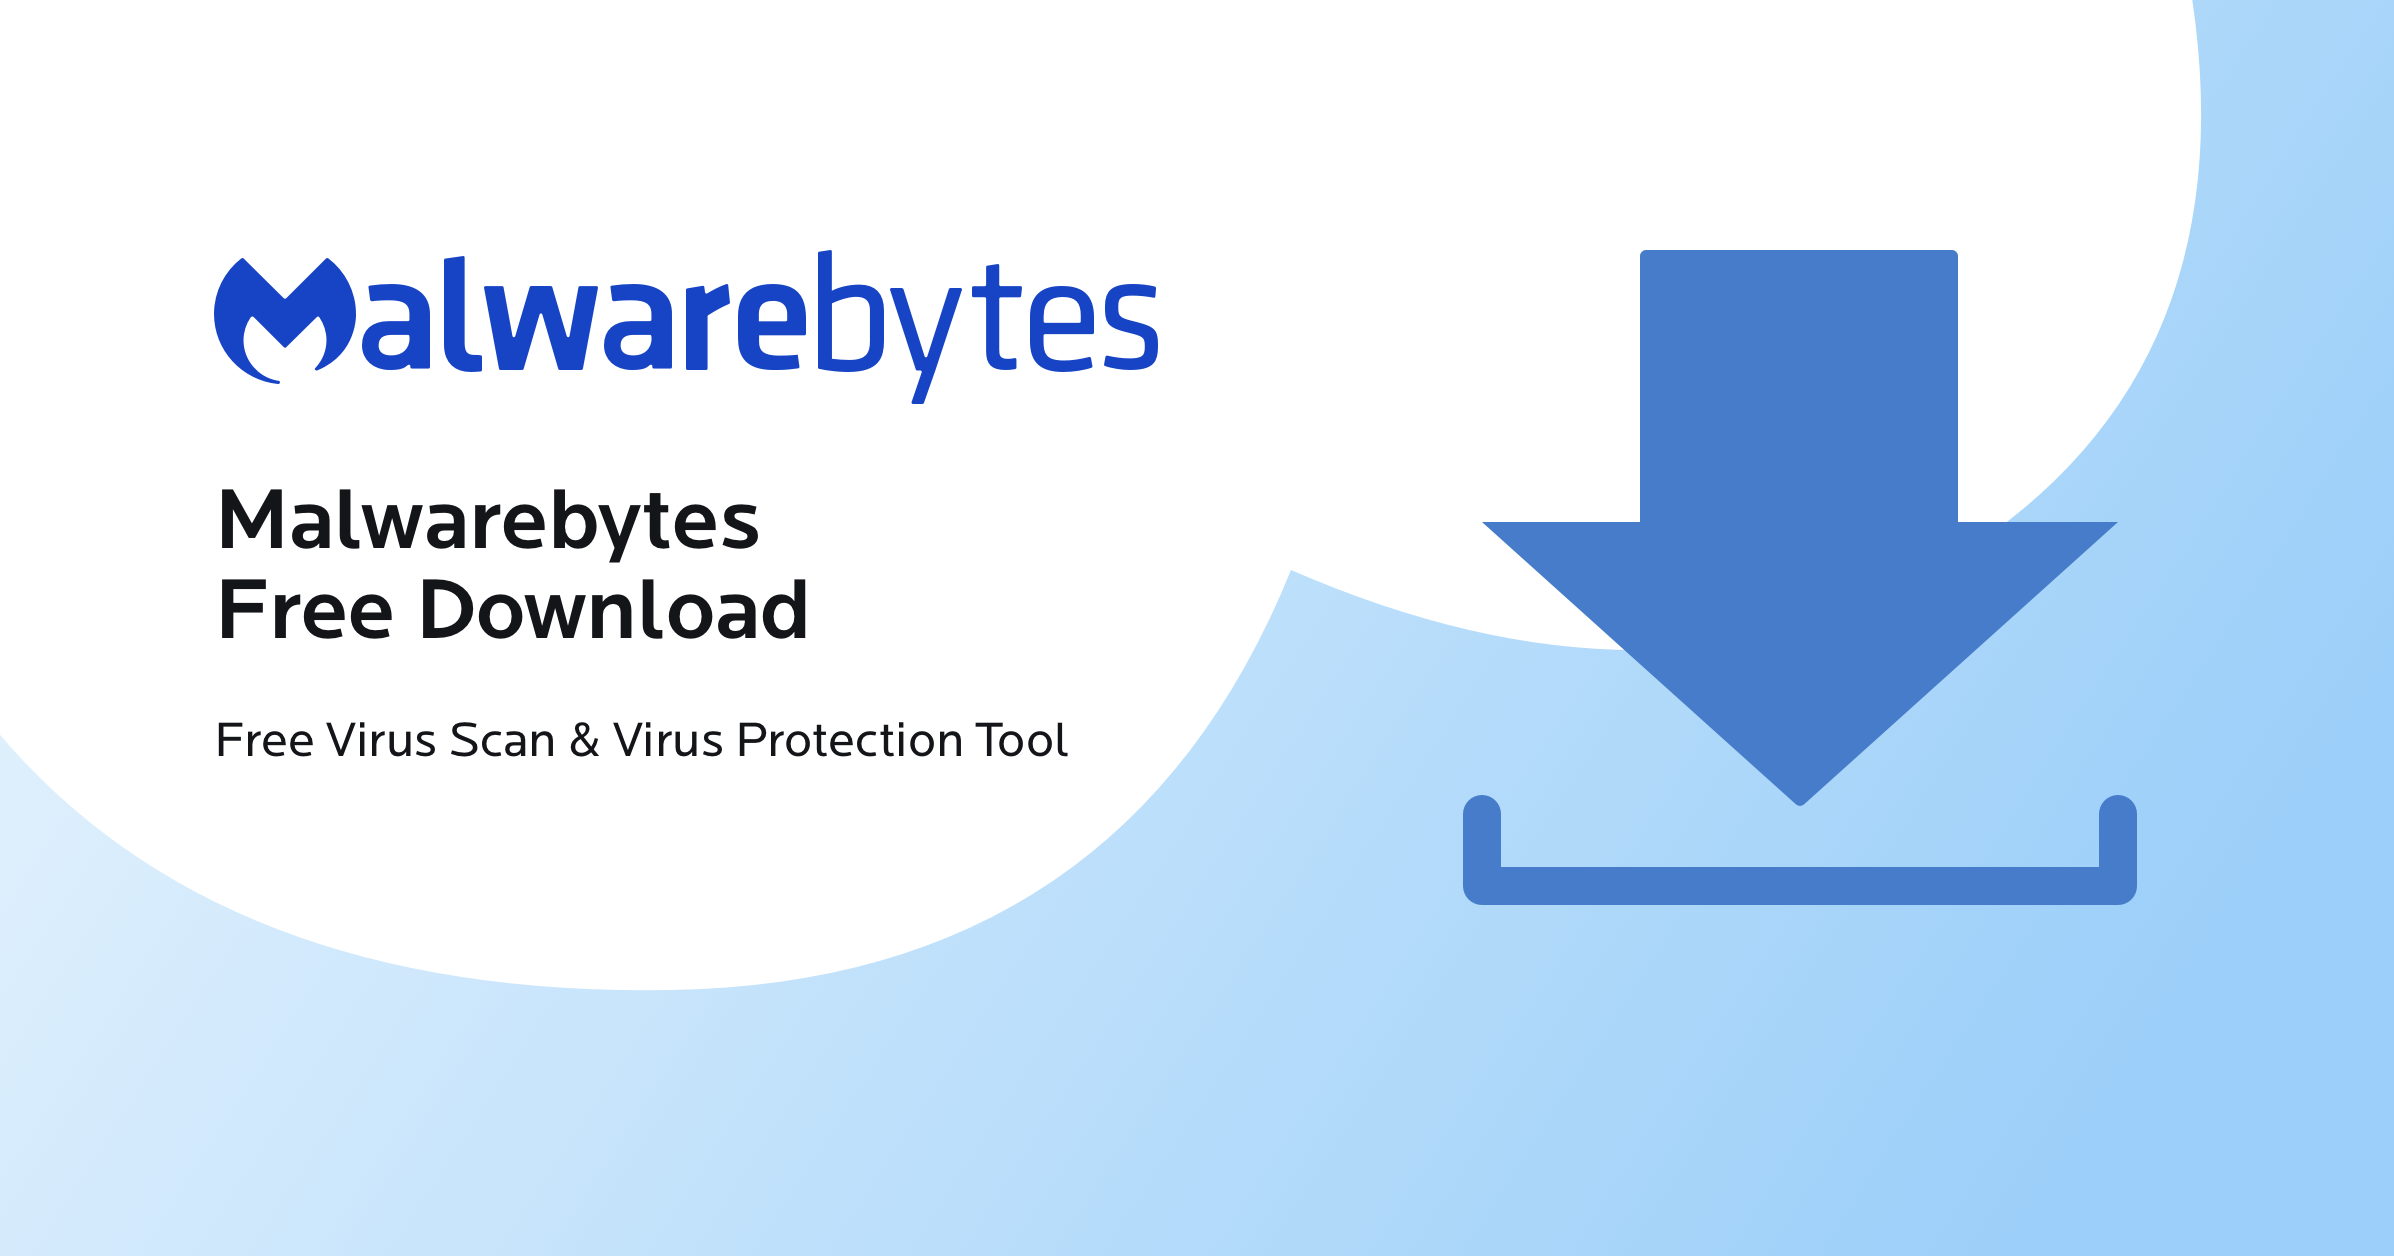 Download and install a reliable anti-malware software
Run a full system scan to detect any malware infections